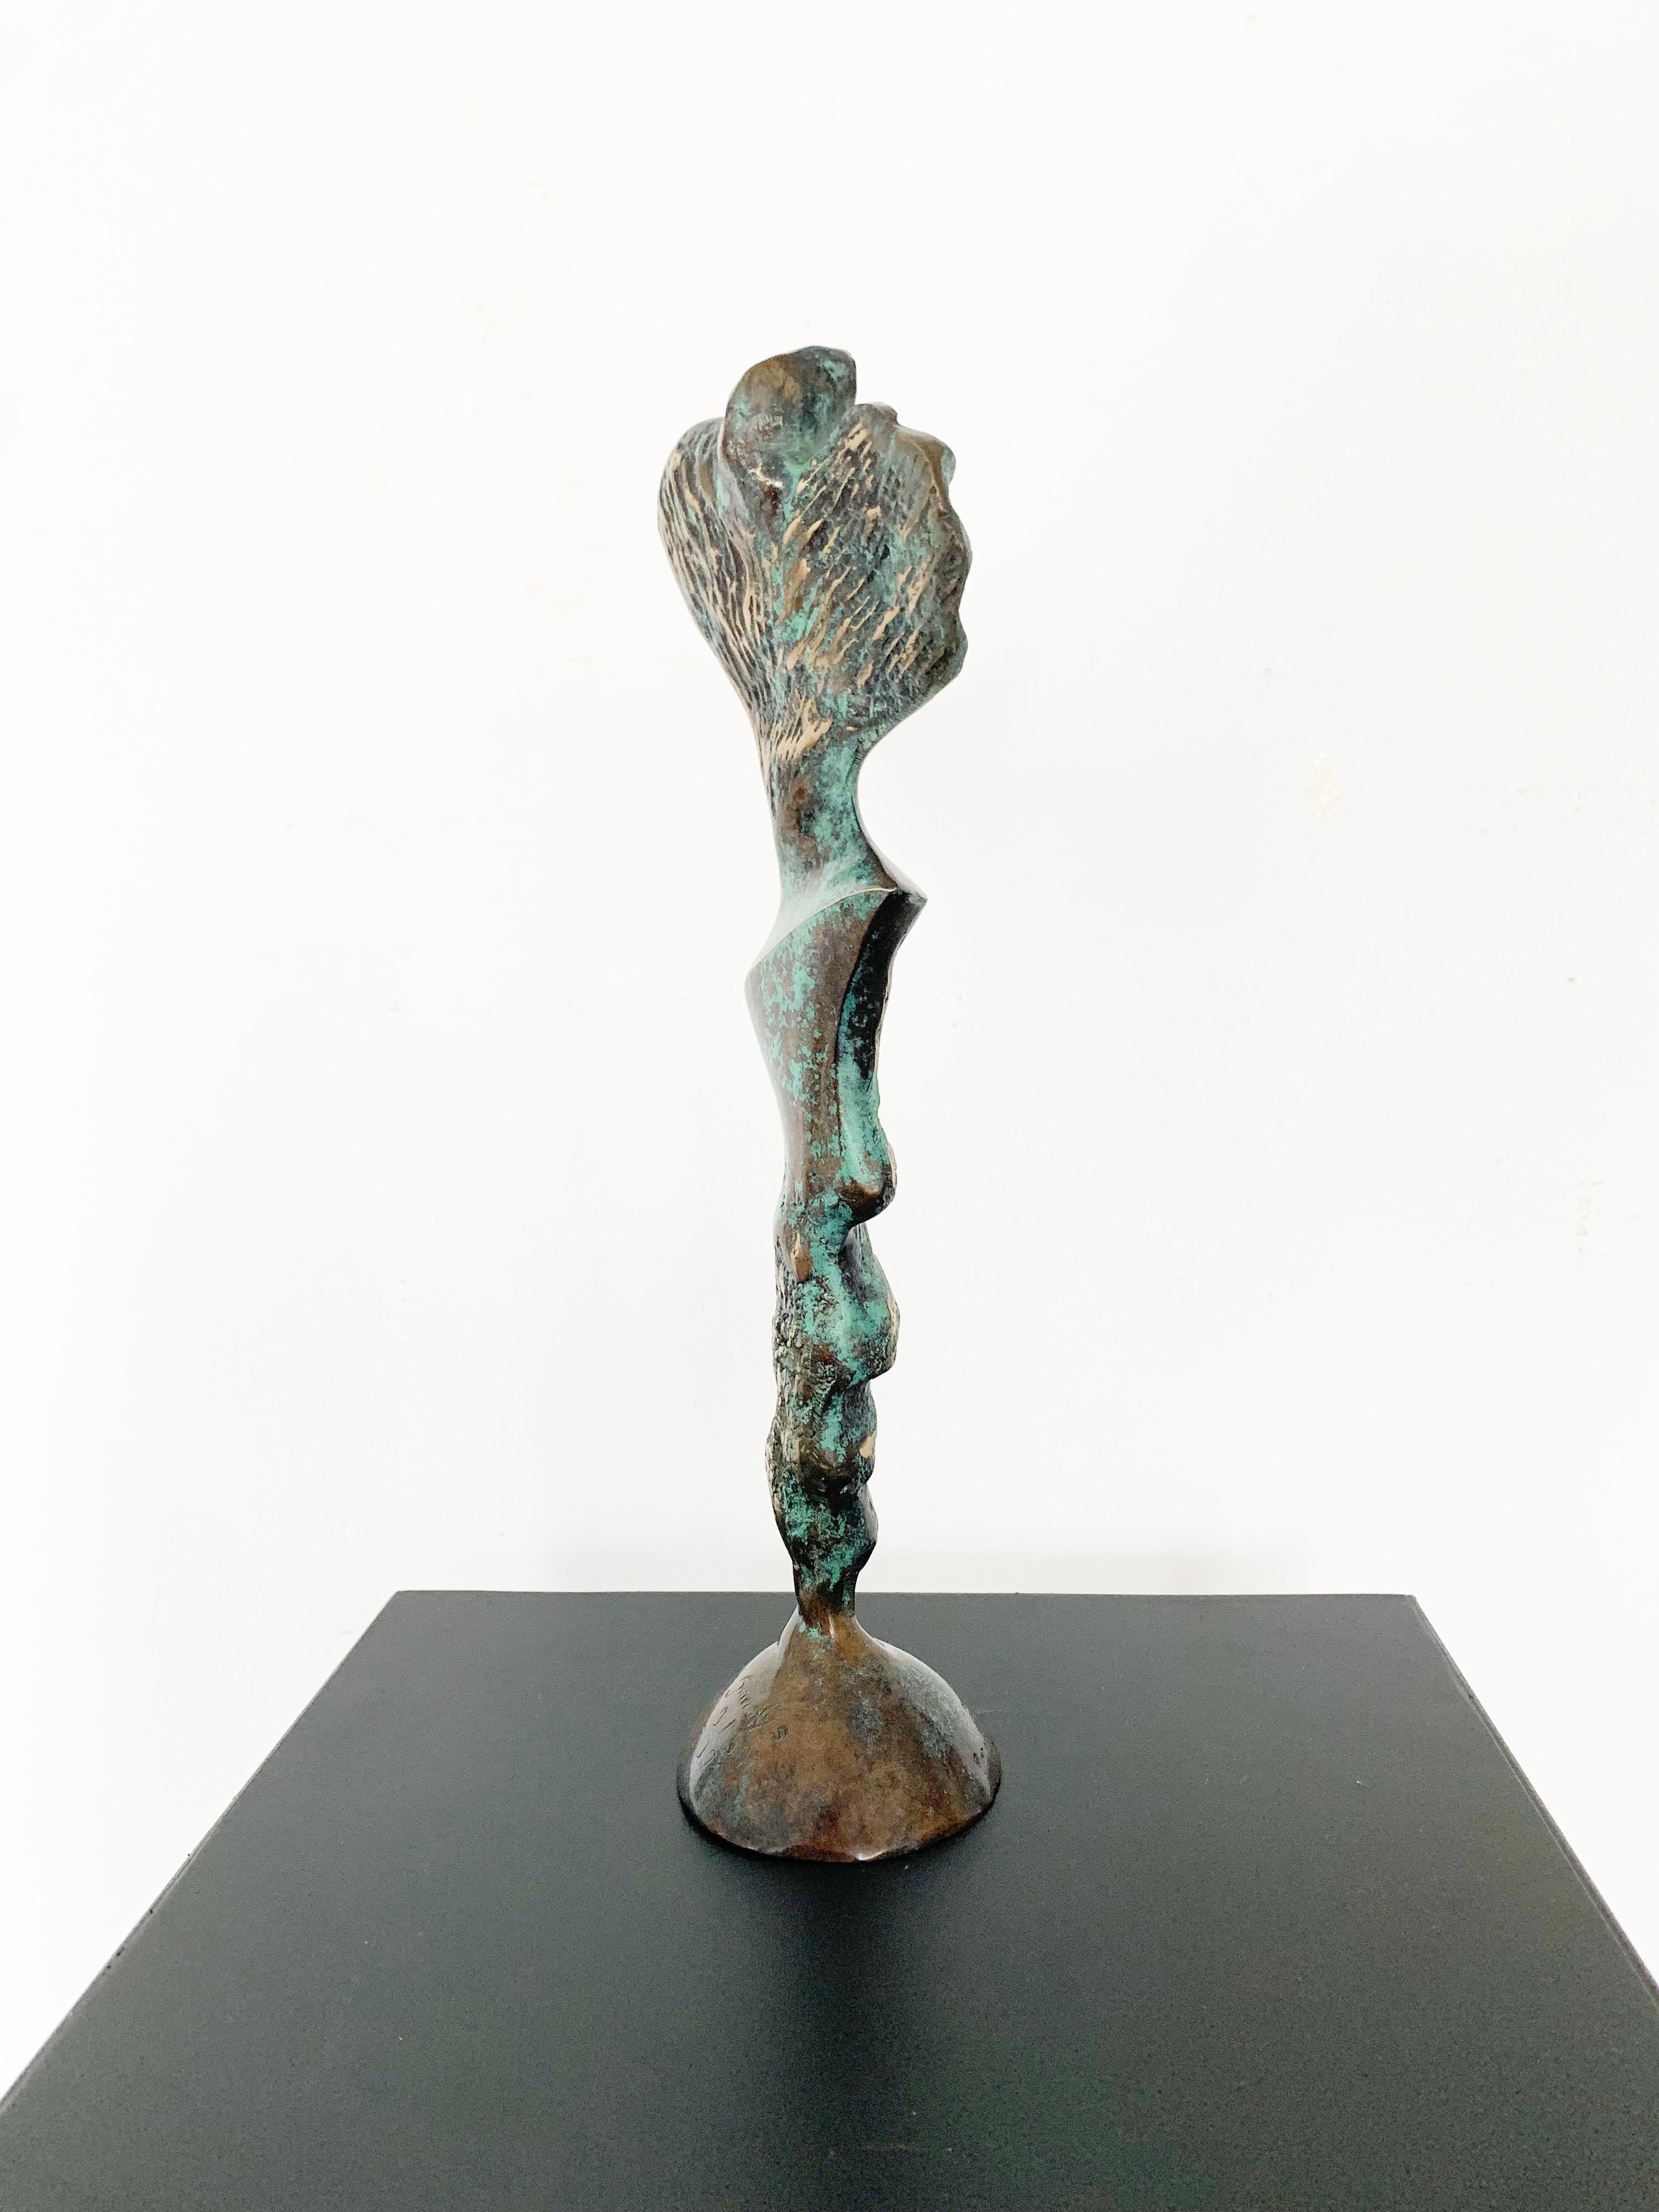 Contemporary bronze sculpture on marble base by Polish artist Stan Wysocki. Artwork comes from limited edition of 50. Sculpture depicts female figure filtered through geometric, synthesizing style. Artist uses patina very consciously as an artistic